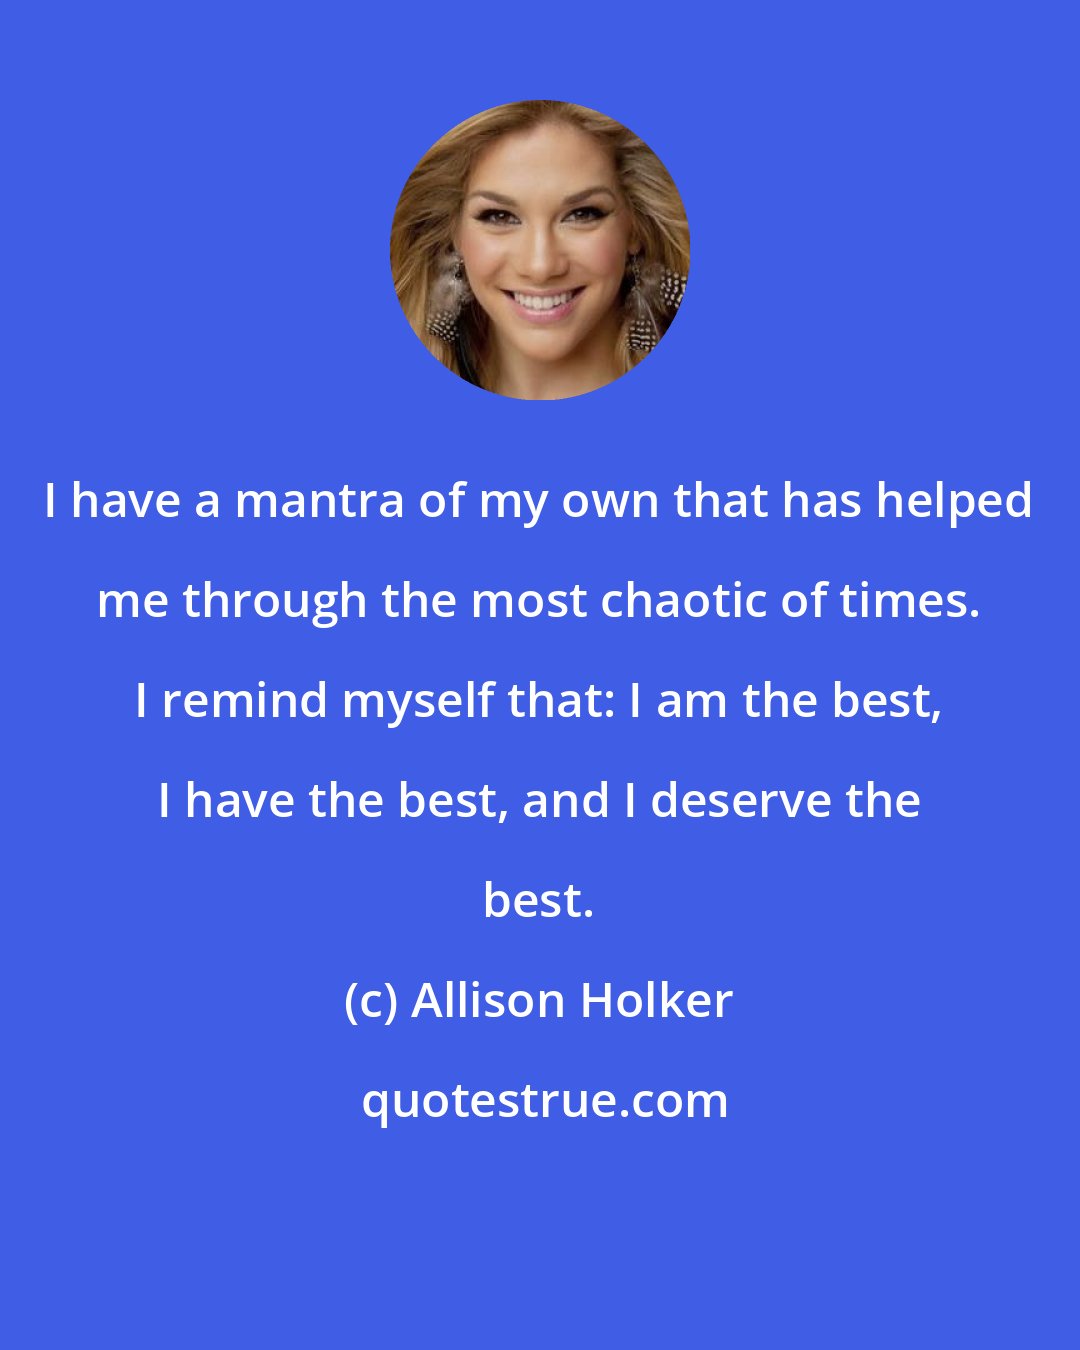 Allison Holker: I have a mantra of my own that has helped me through the most chaotic of times. I remind myself that: I am the best, I have the best, and I deserve the best.